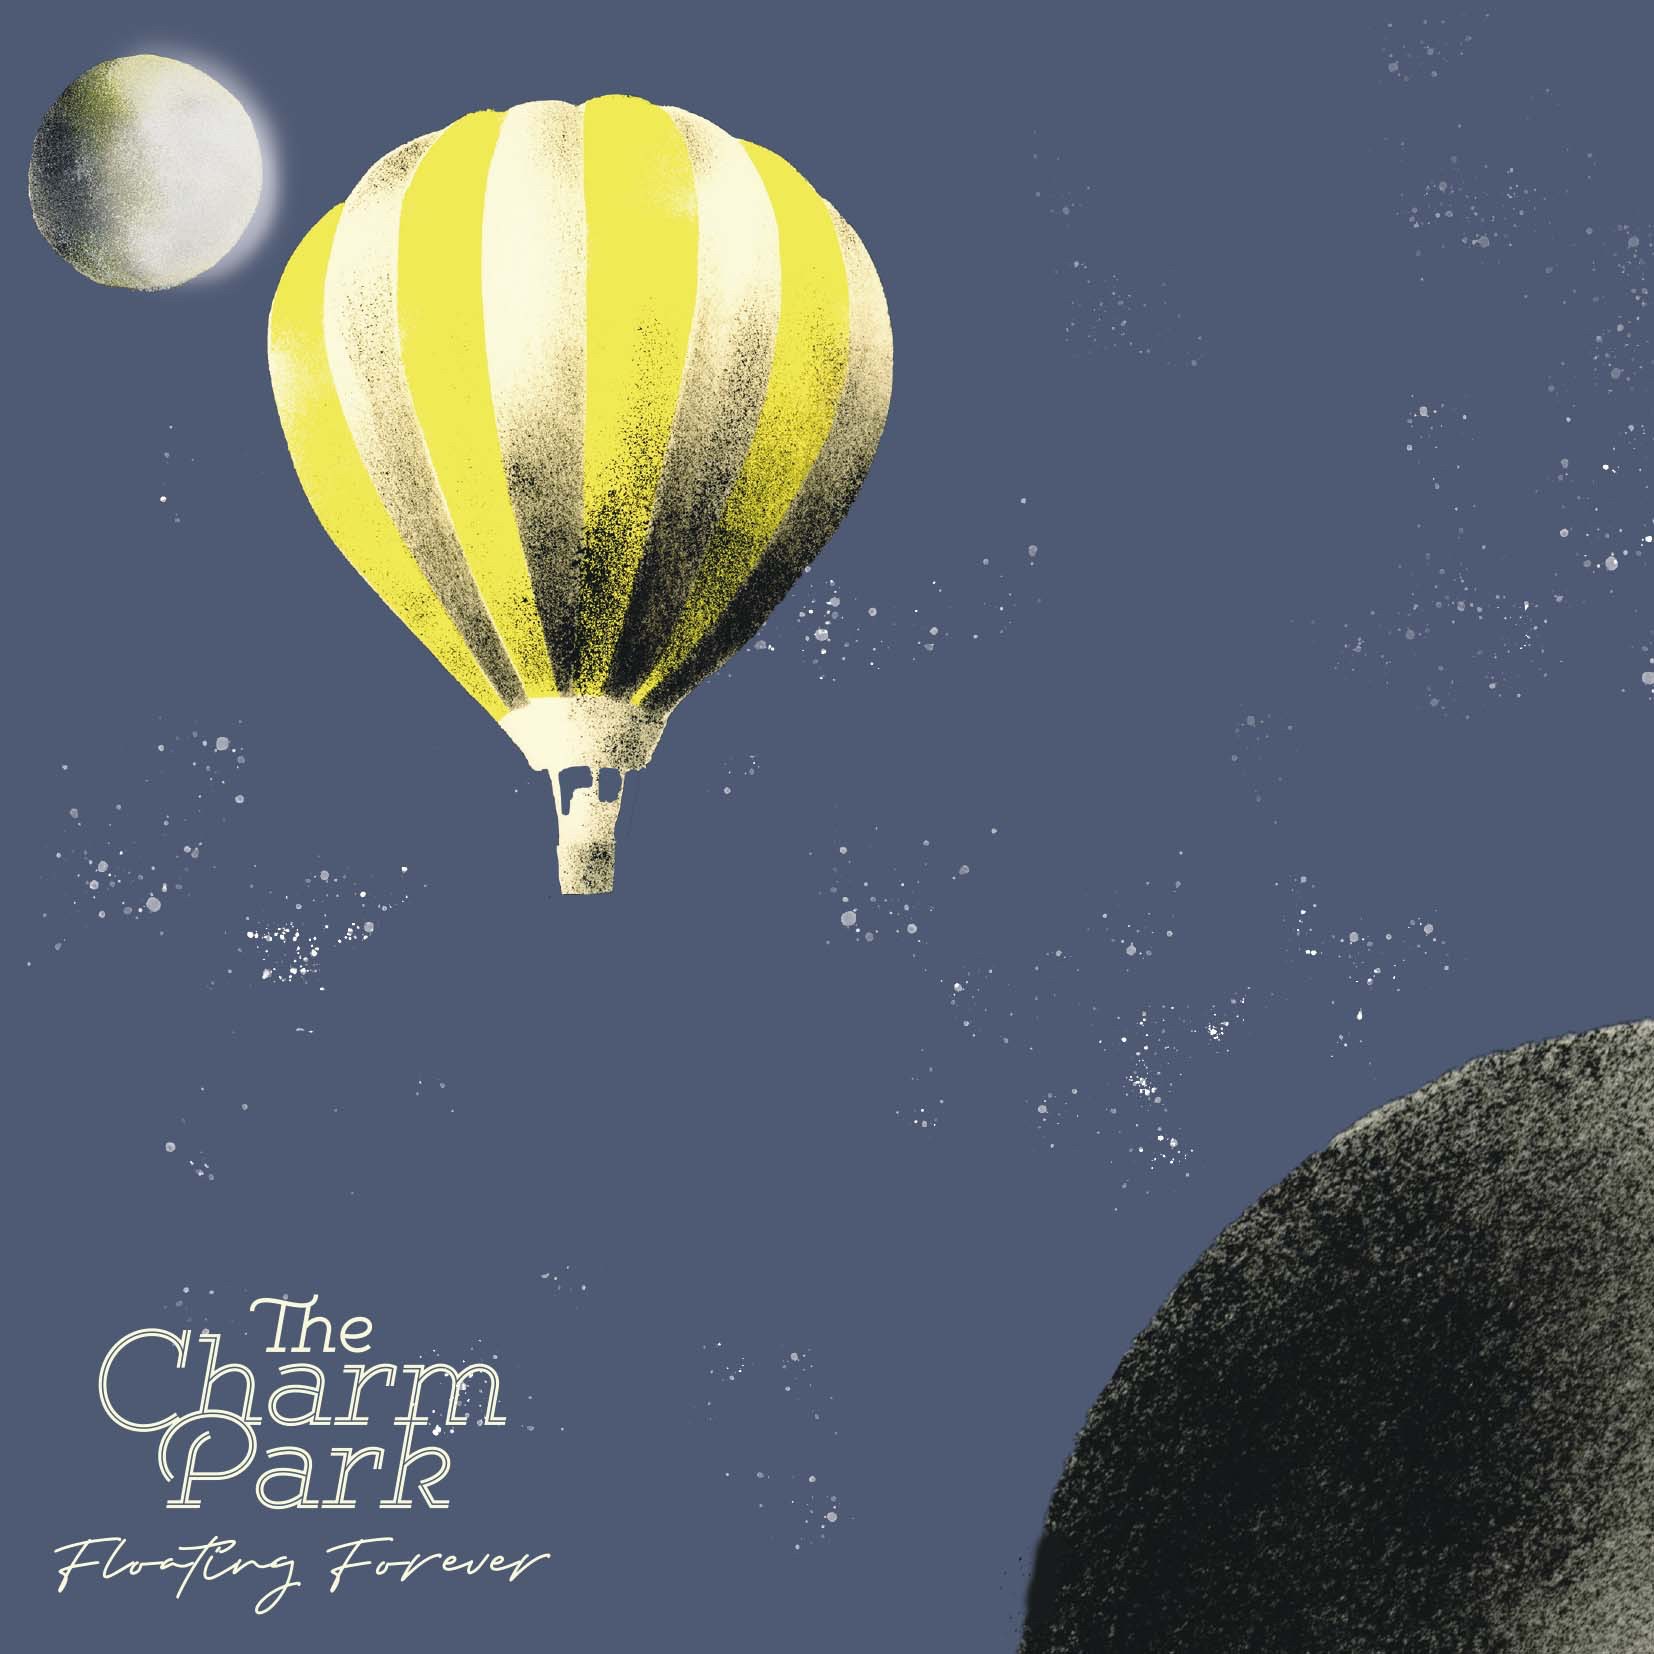 THE CHARM PARK – Floating Forever [FLAC / WEB] [2021.10.13]